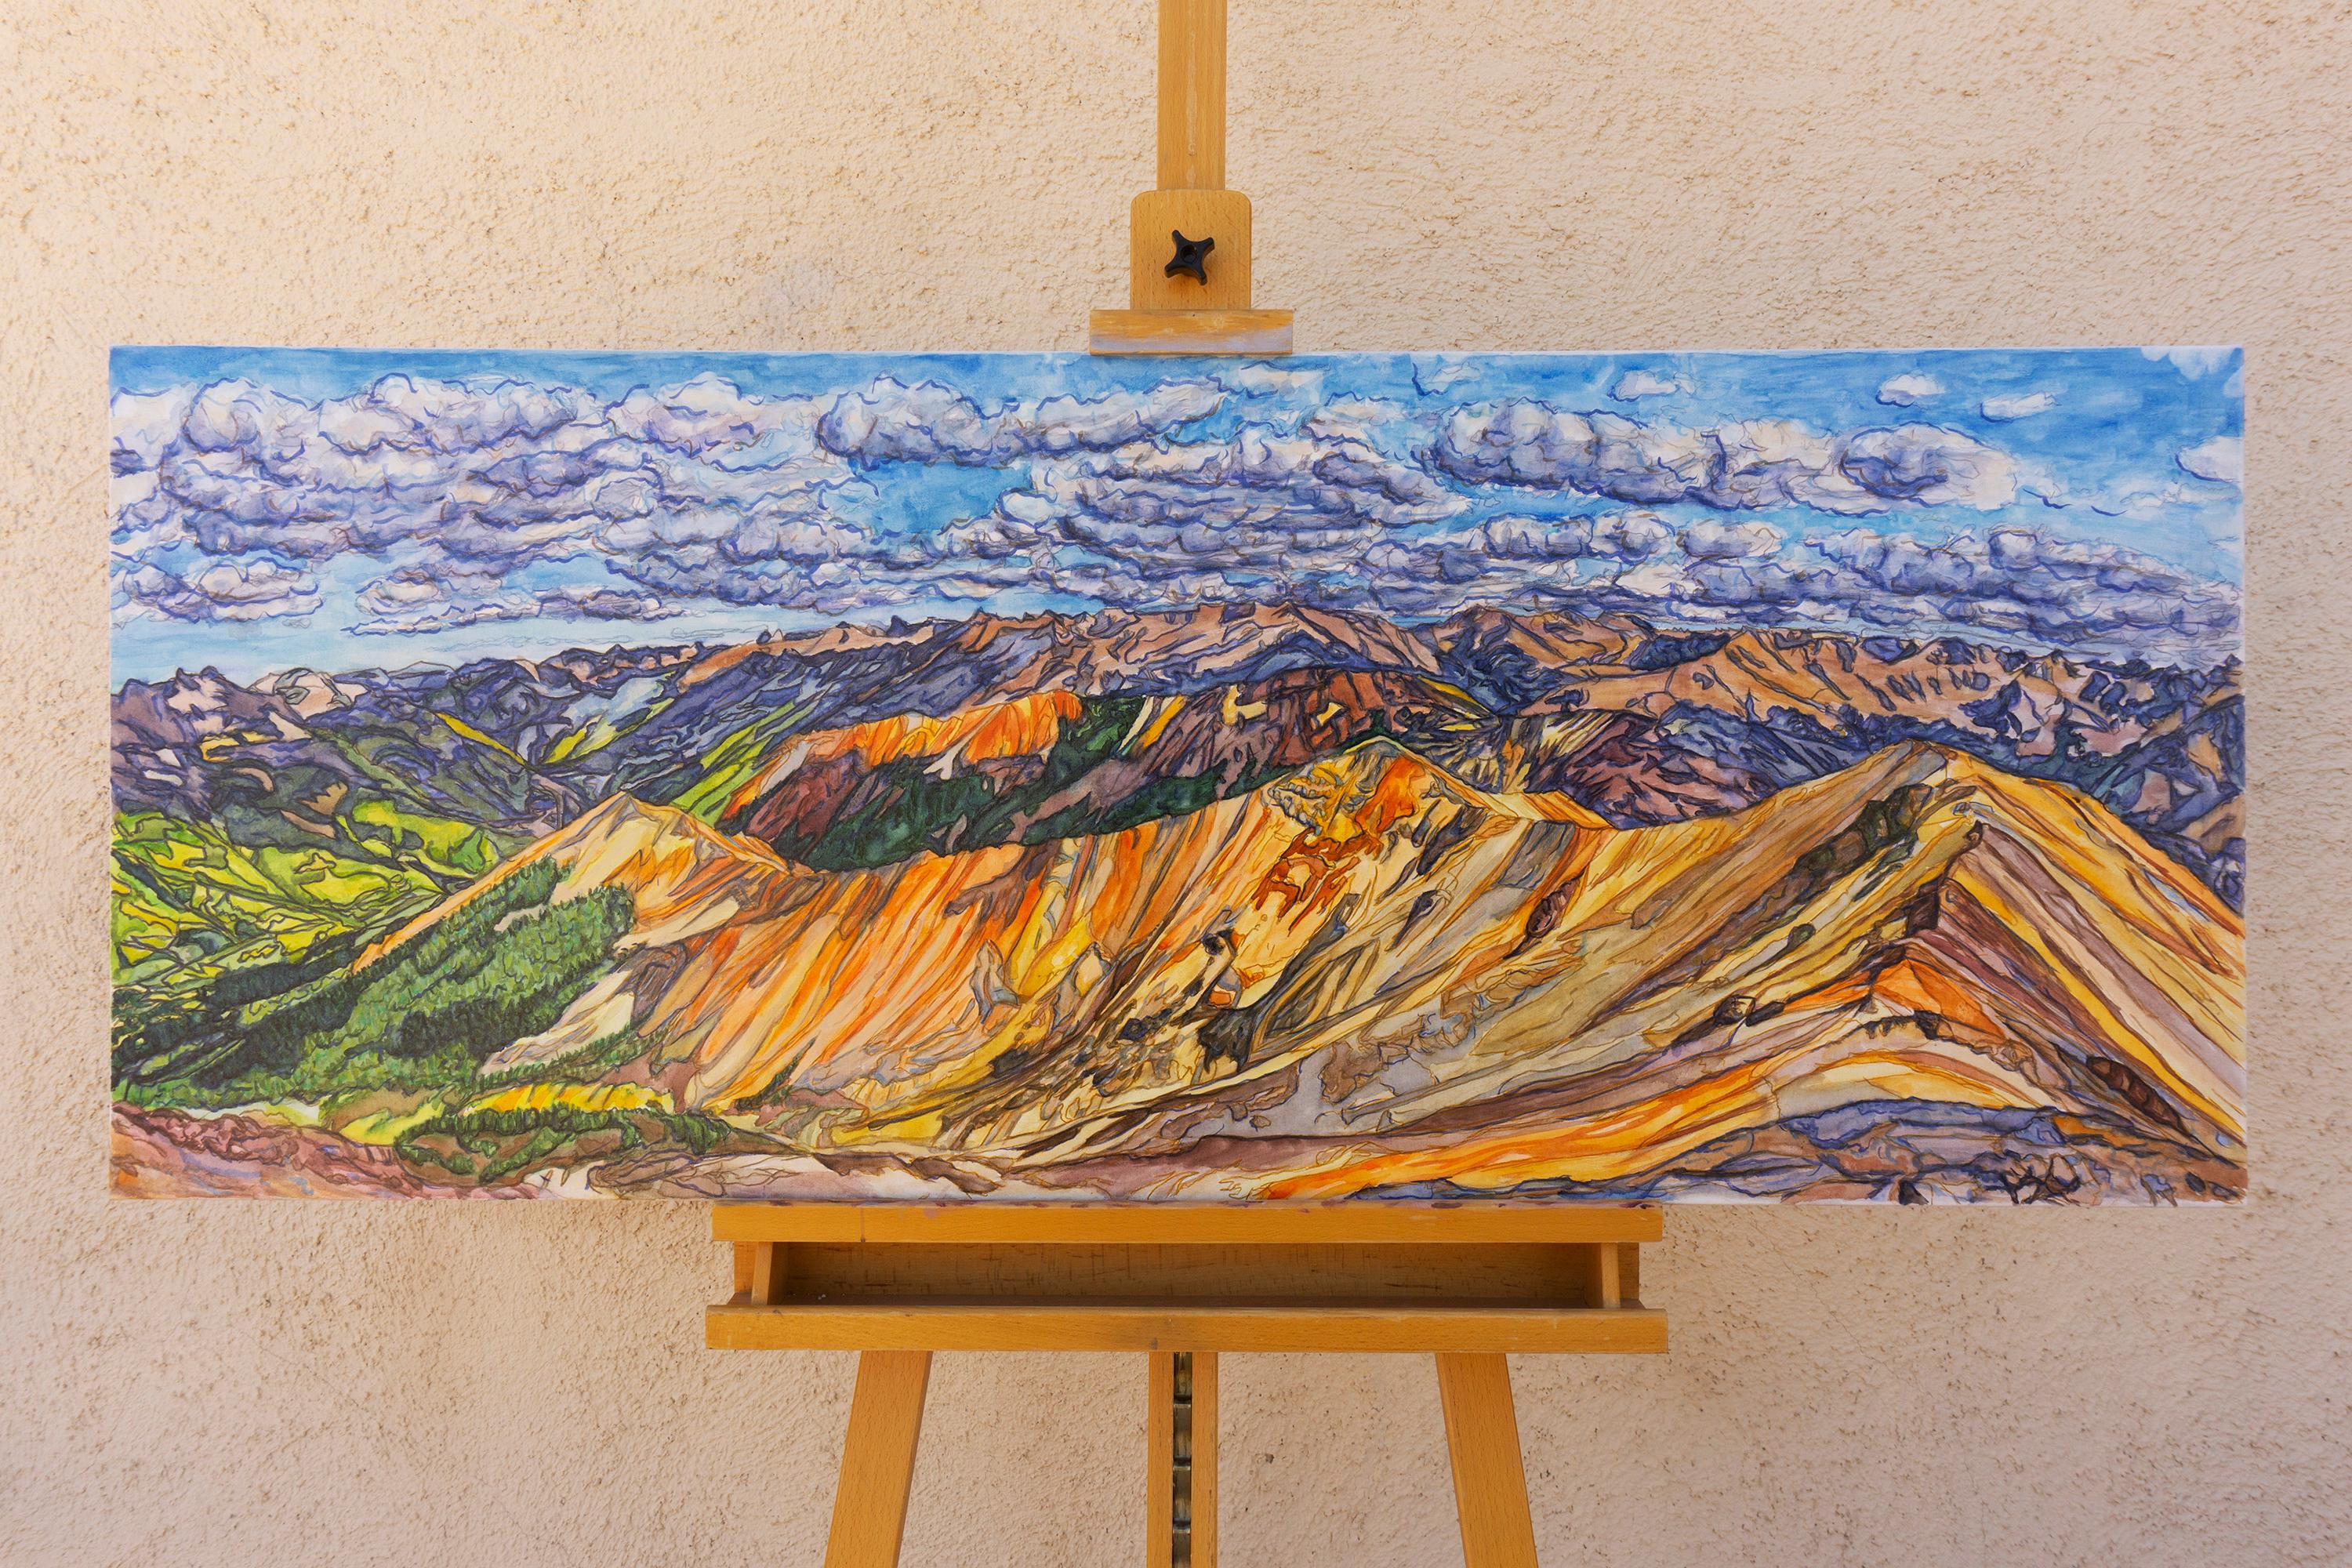 <p>Artist Comments<br>A wildly colorful panorama from the San Juan Mountains in Colorado unfolds in warm layers, with clouds casting cool blue shadows in contrast. The greens of the trees complement the palette, while painterly strokes add depth and